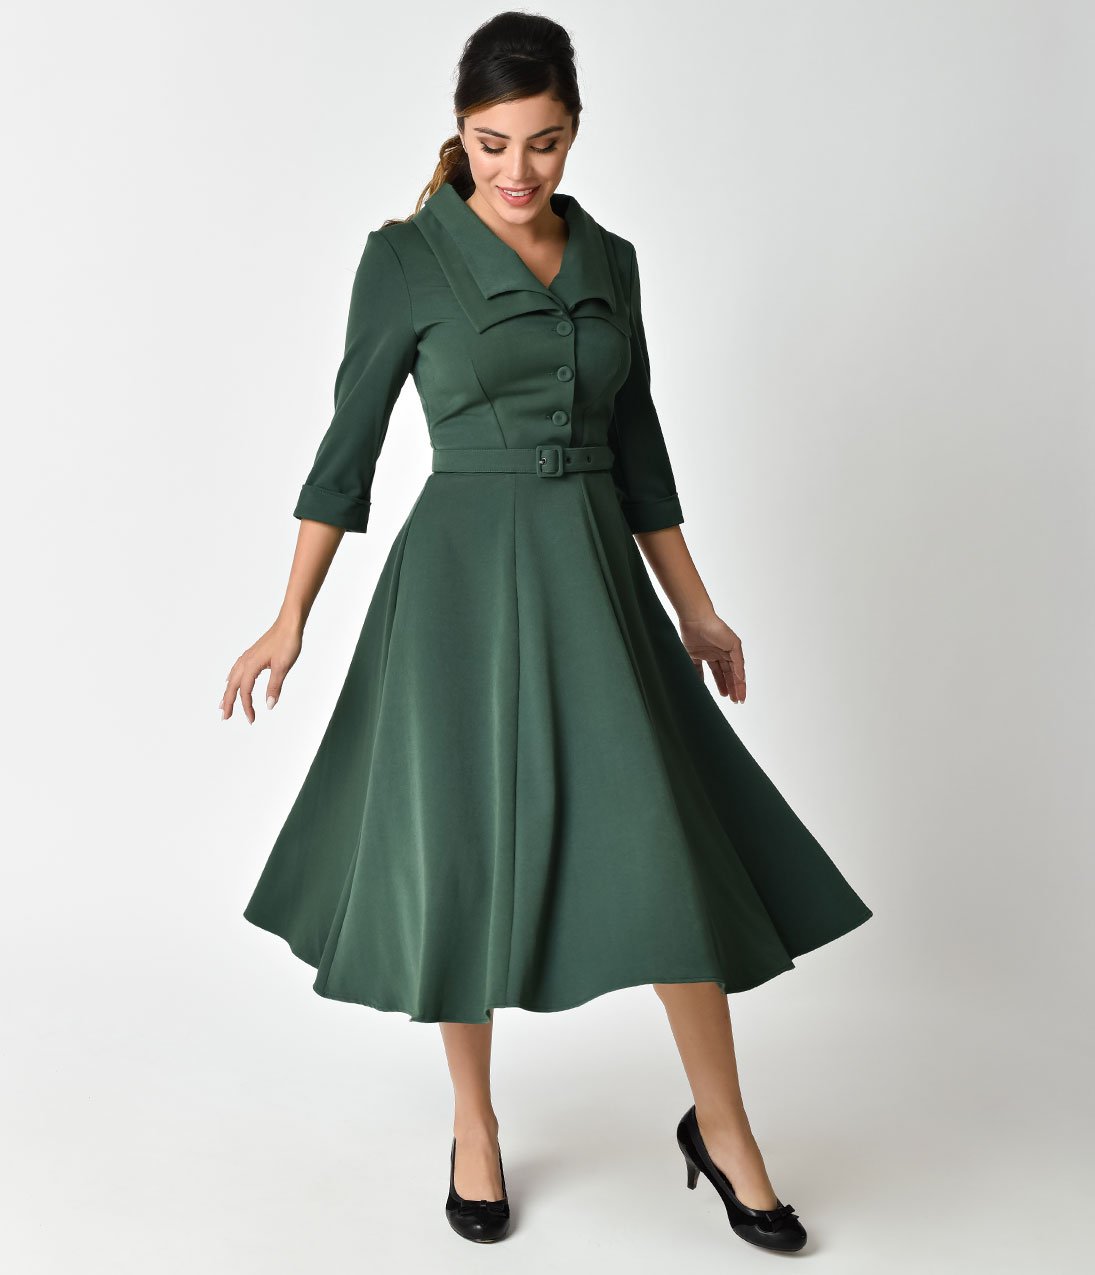 1940s style dresses what did women wear in the 1940s? 40s fashion trends miss candy floss 1940s UXDCBGH